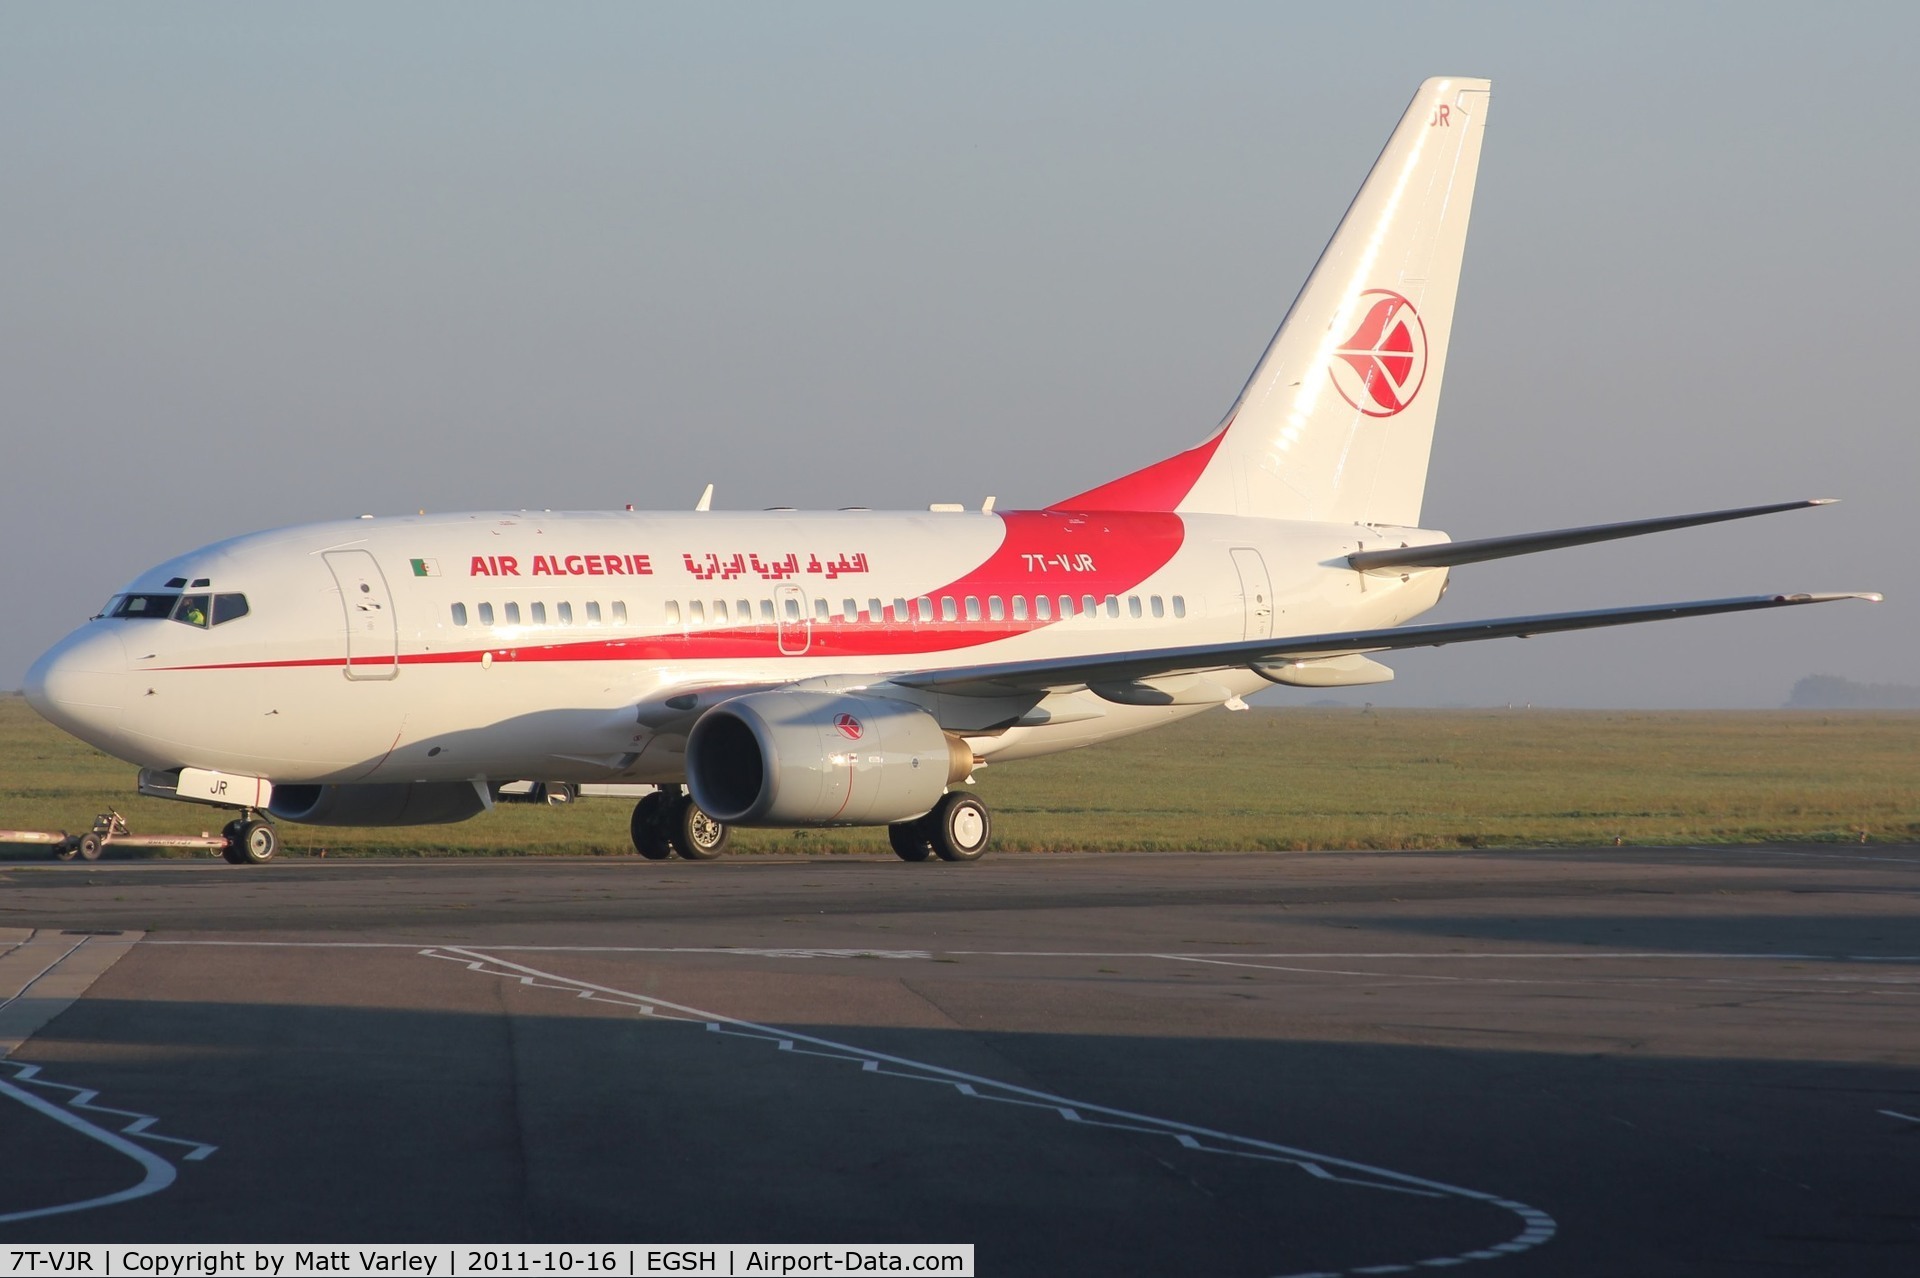 7T-VJR, 2002 Boeing 737-6D6 C/N 30545, Being towed from Air Livery in early morning sun.